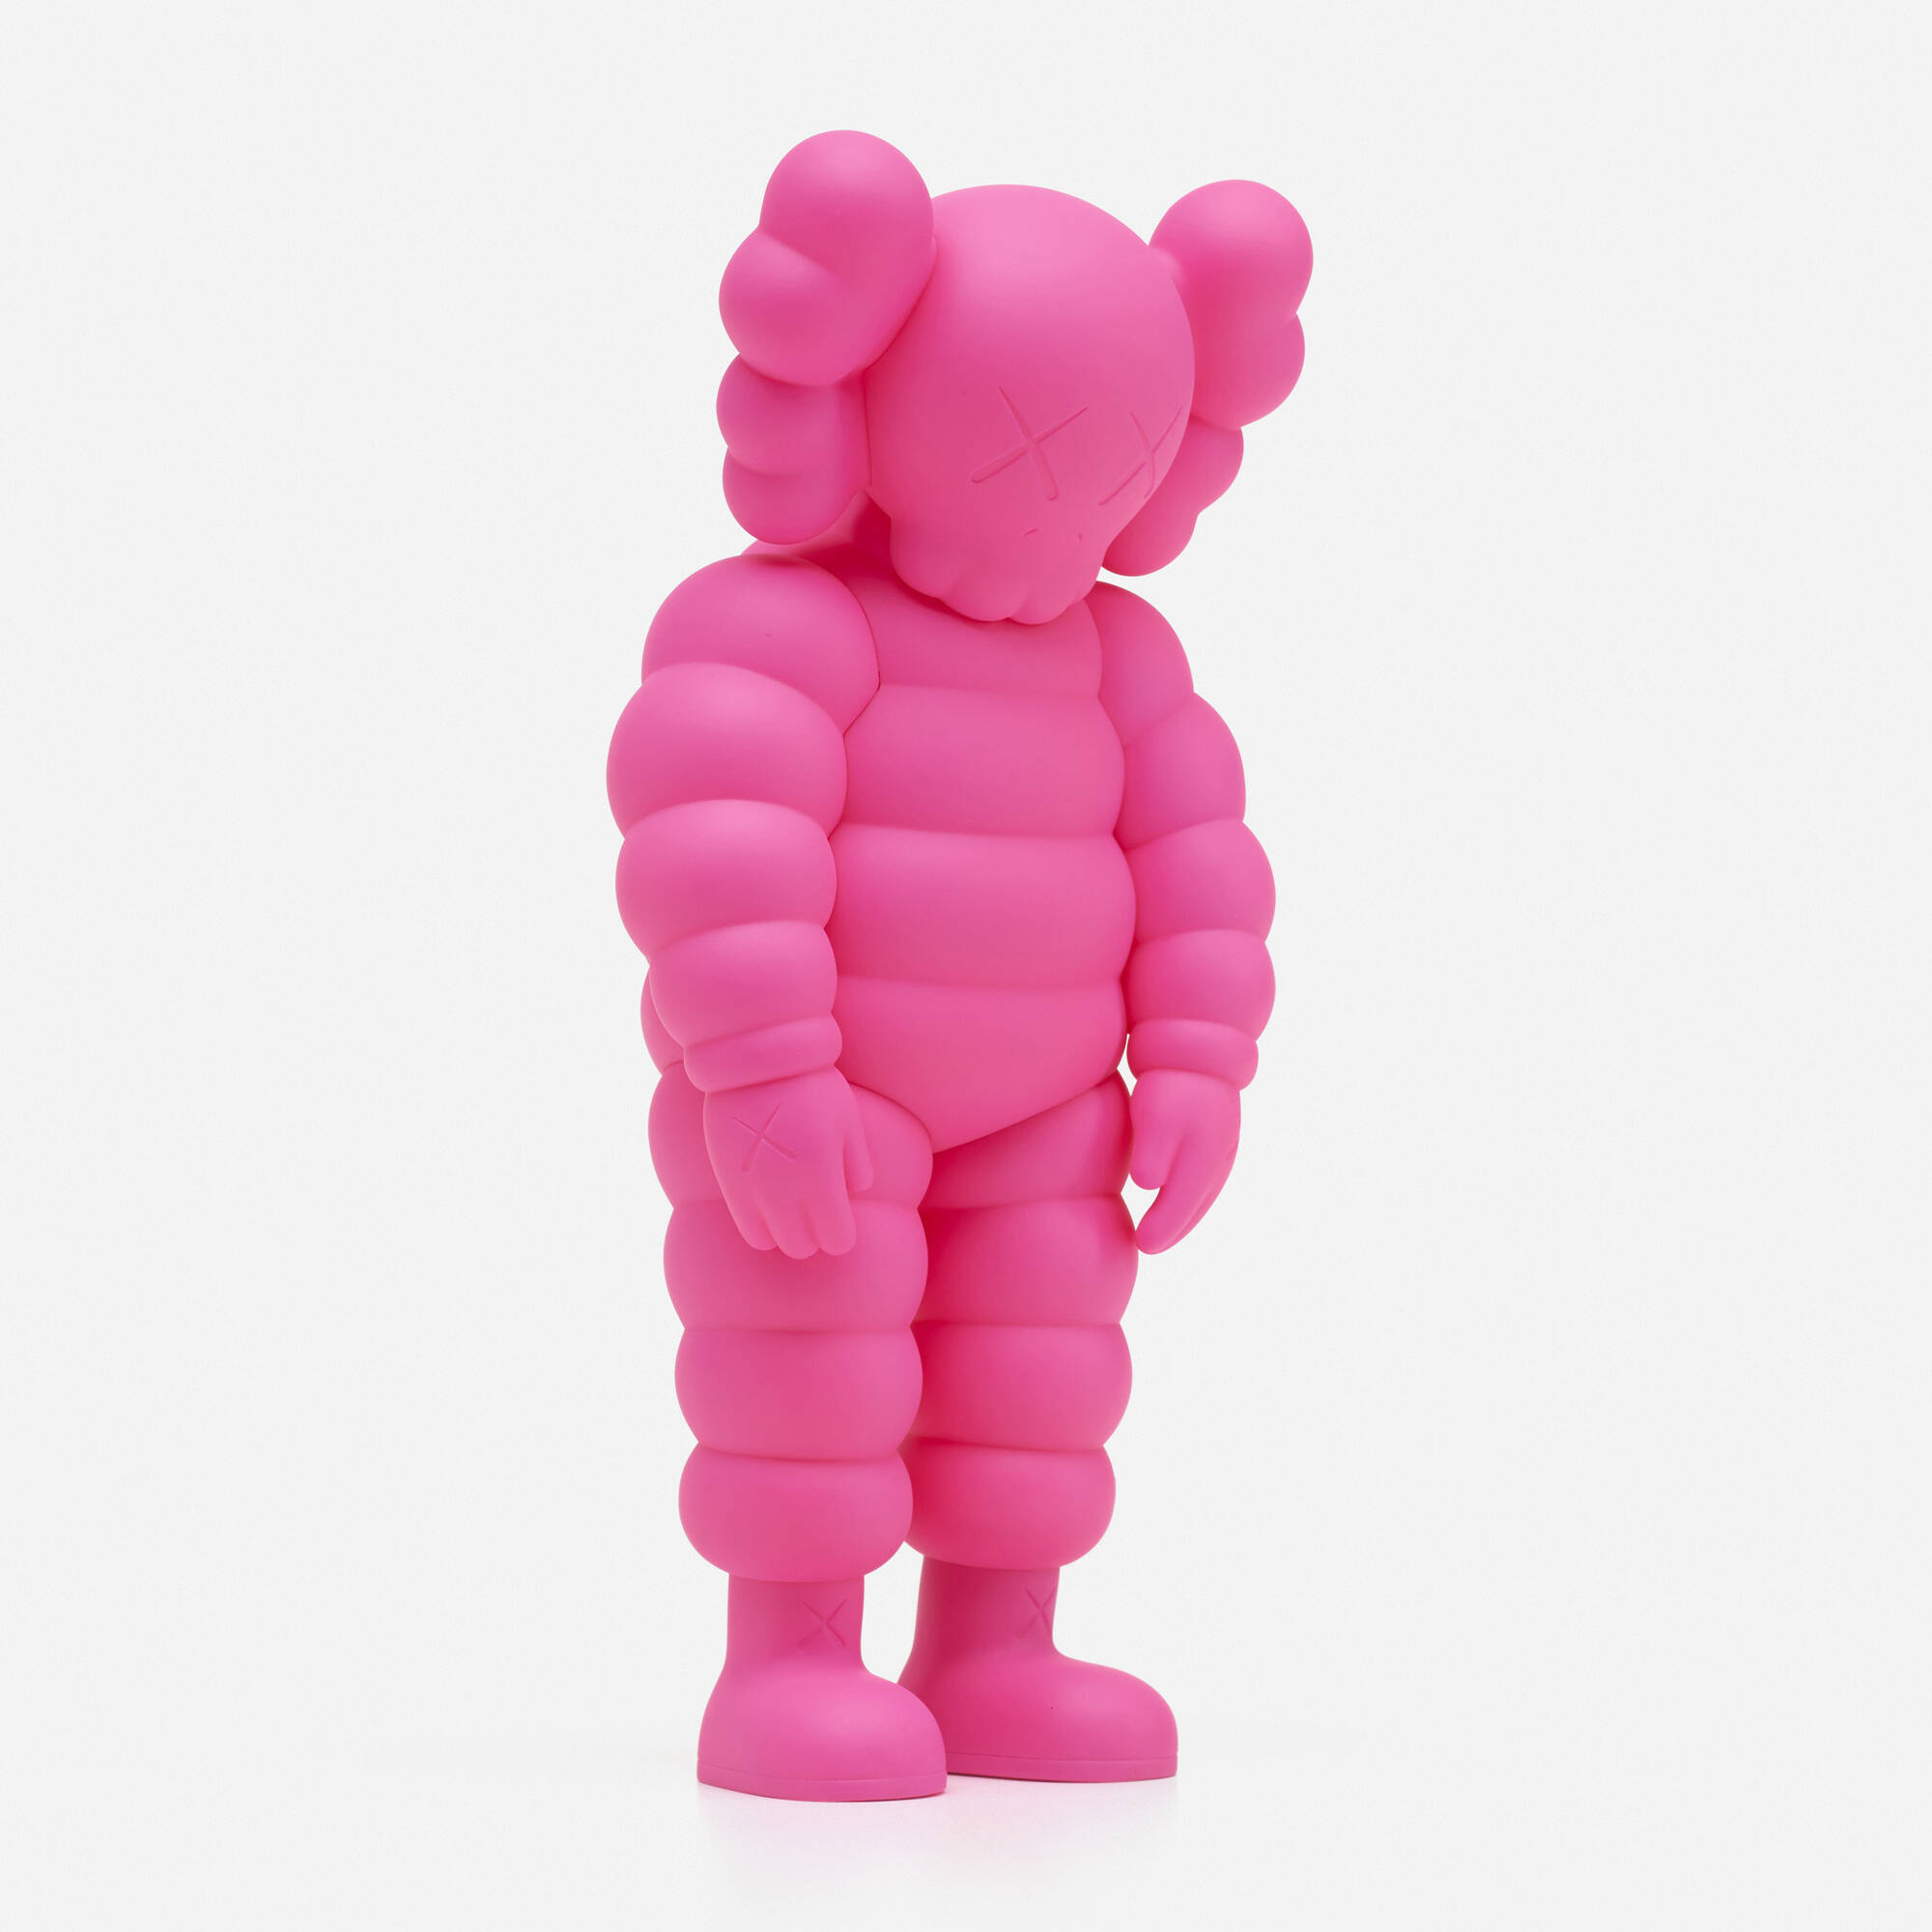 170: KAWS (BRIAN DONNELLY), What Party (Pink) < Art + Design, 6